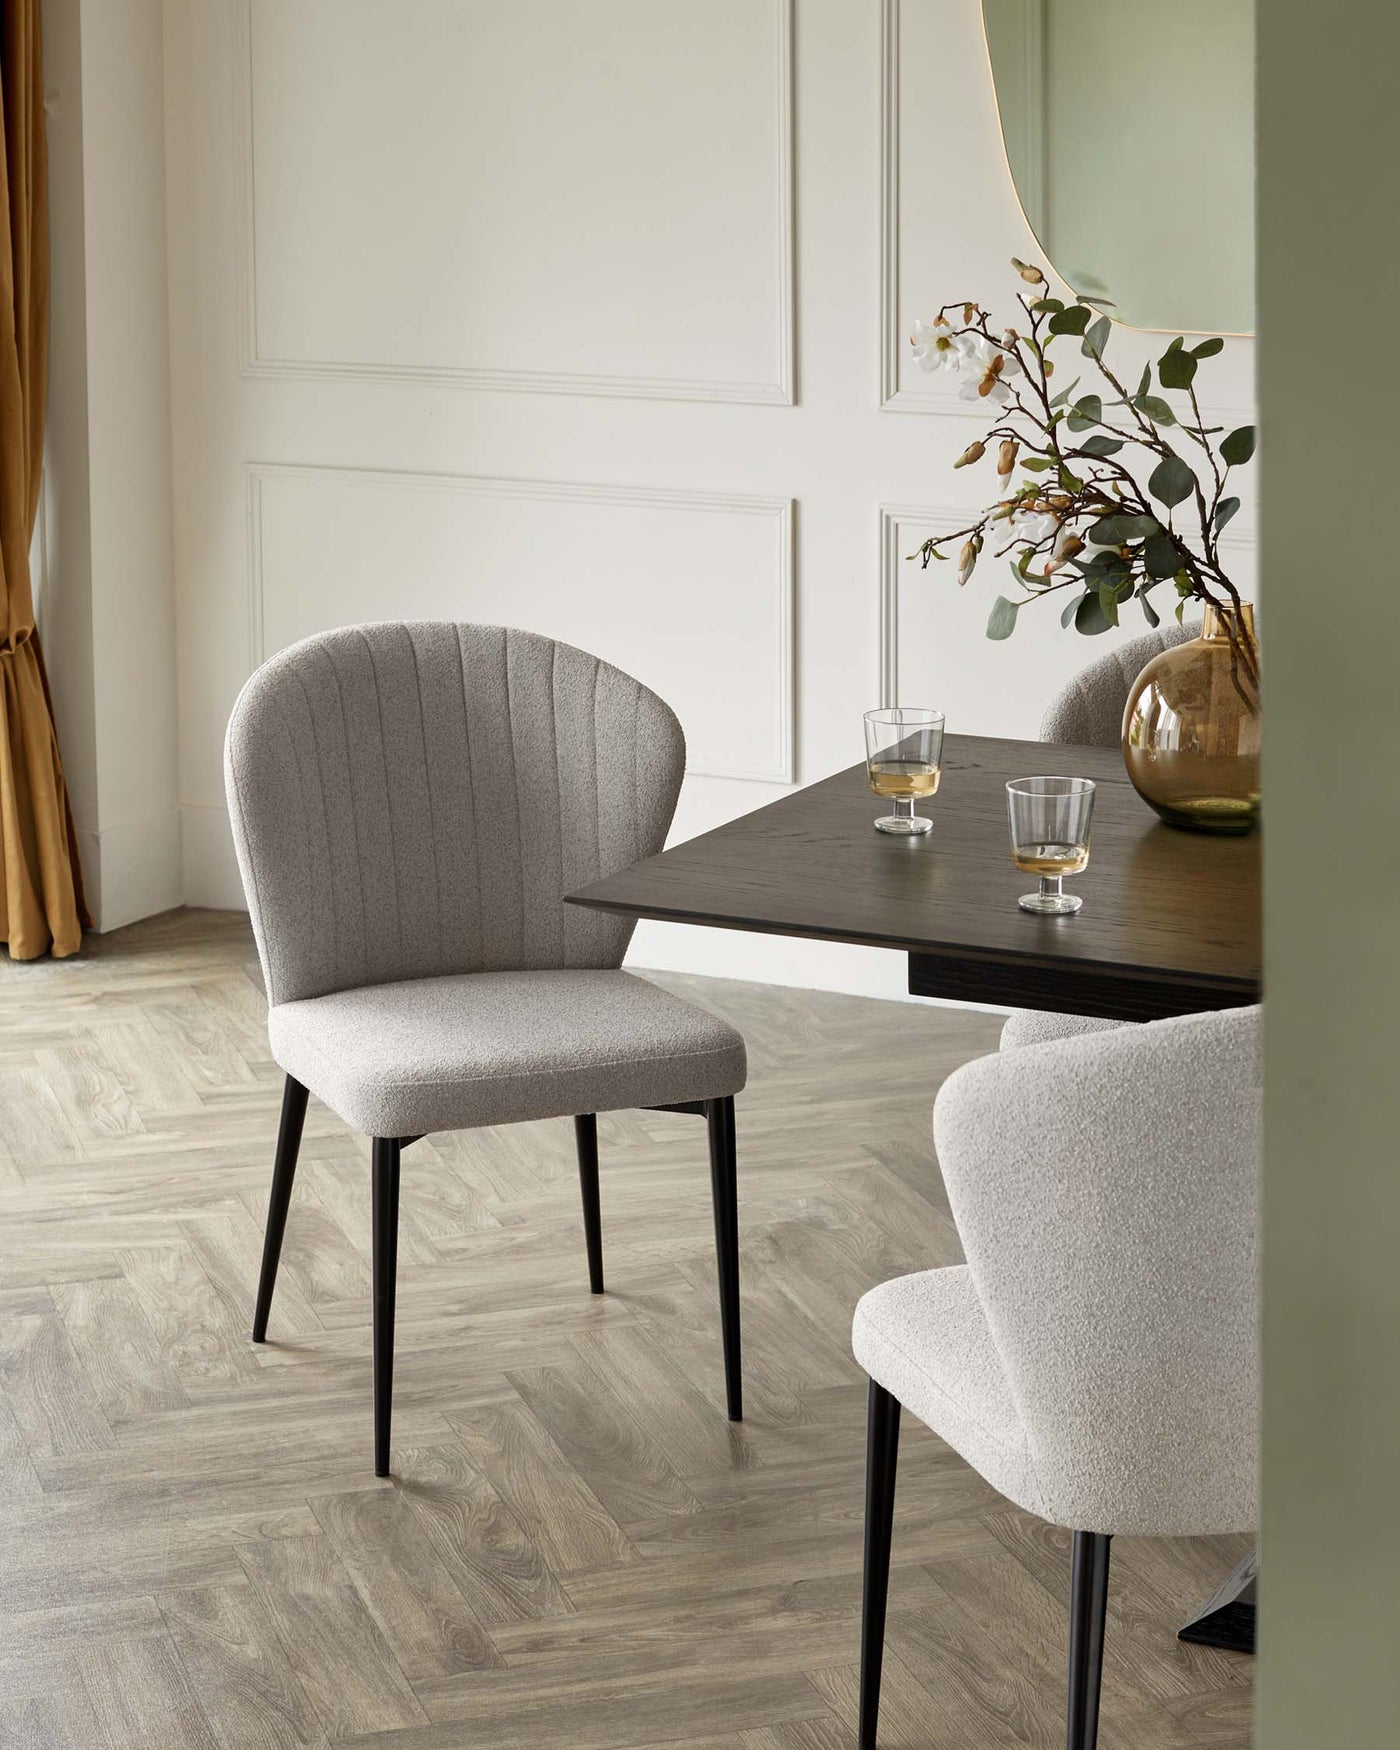 Modern minimalist dining setup featuring an elegant dark wood table paired with two stylish upholstered chairs with channel tufting and black legs. The design is complemented by a gold-rimmed mirror and vase with greenery.